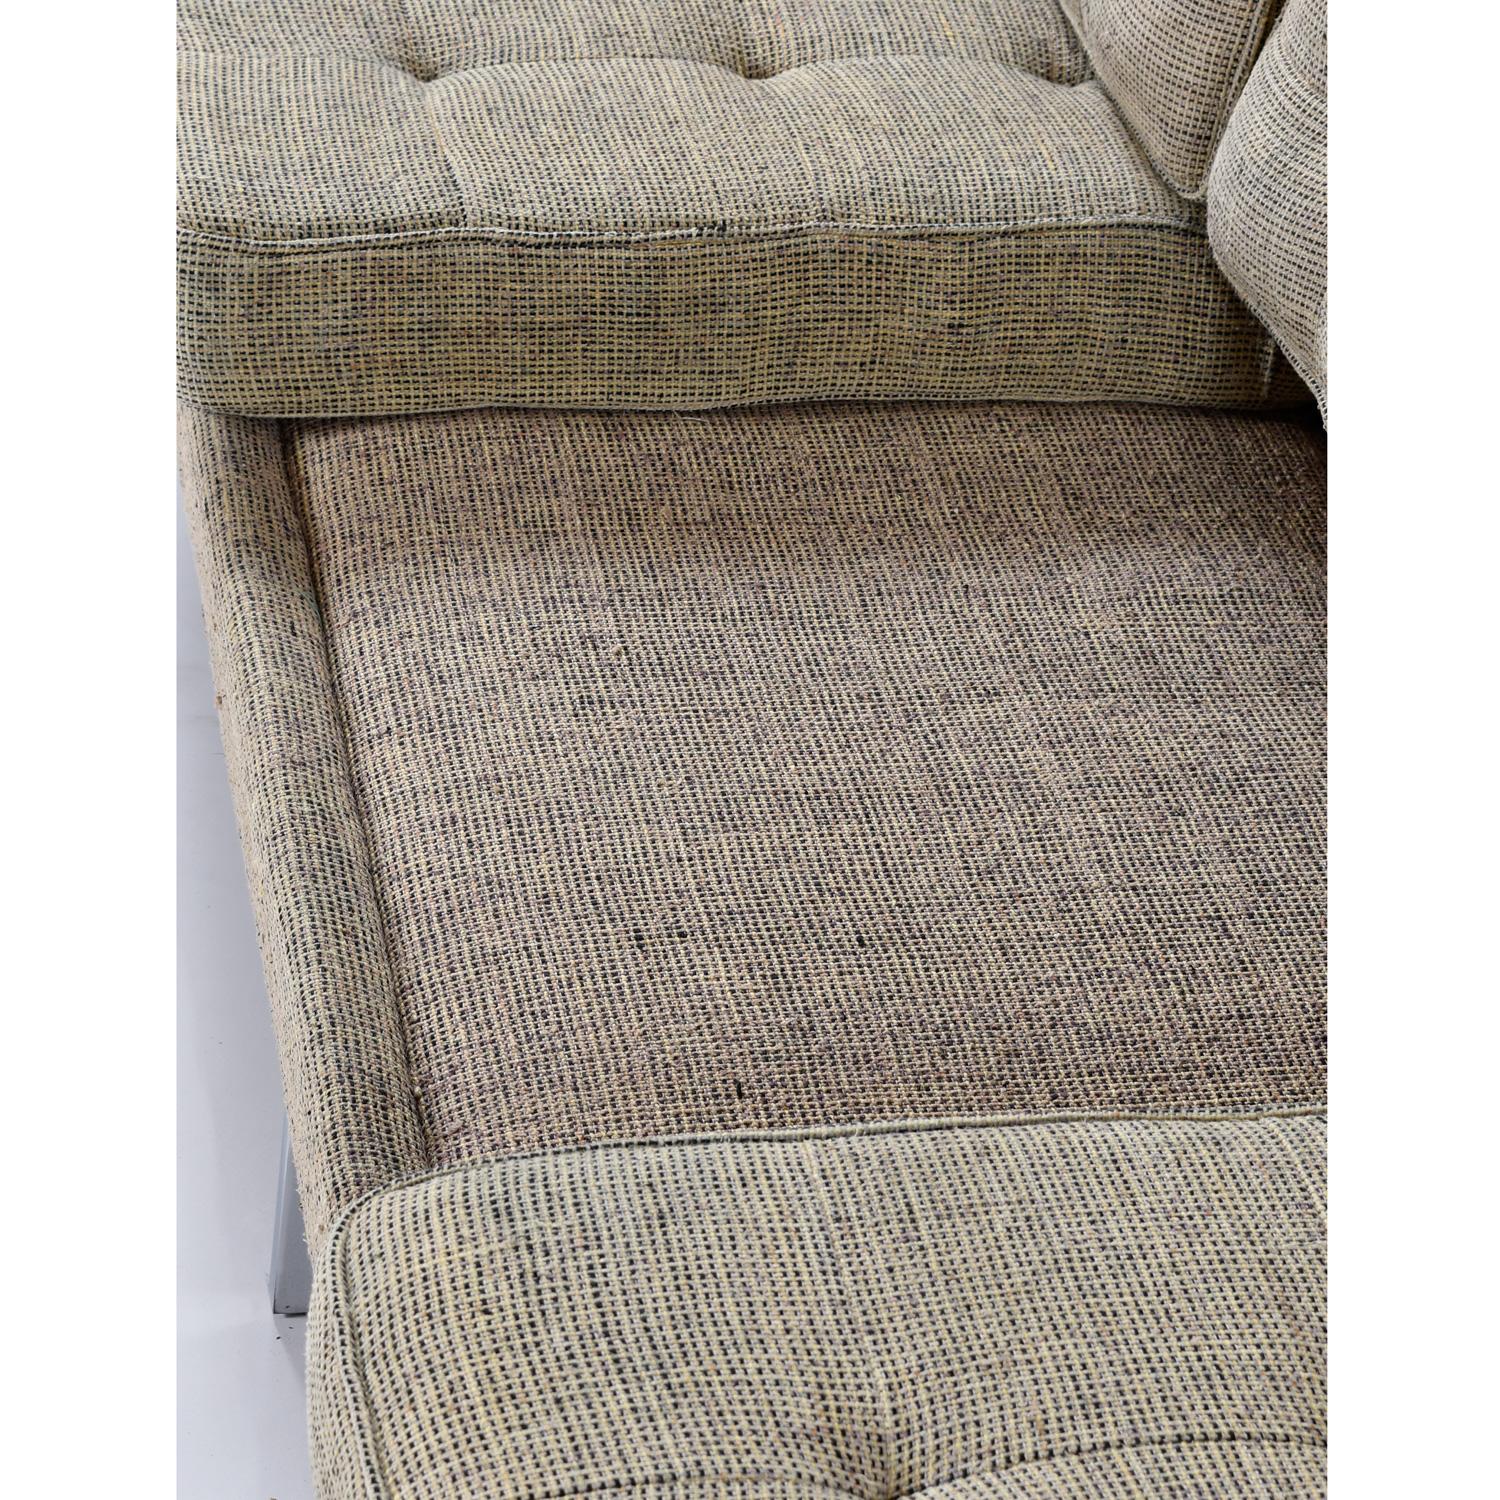 Florence Knoll Sofa & Chair Set on Steel Bases in Heather Grey Tweed Fabric 5